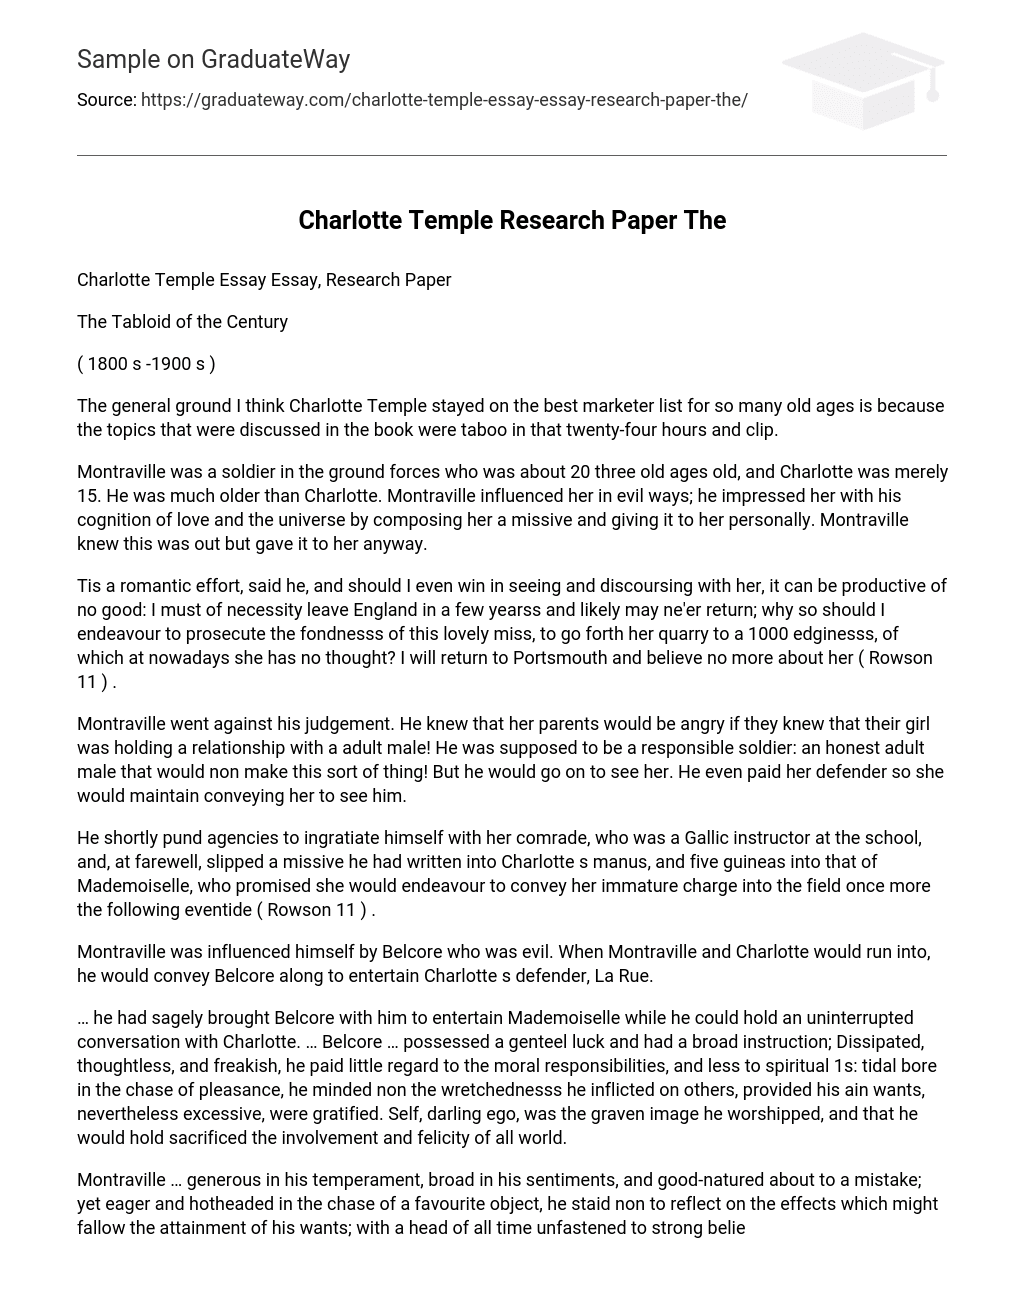 Charlotte Temple Research Paper The